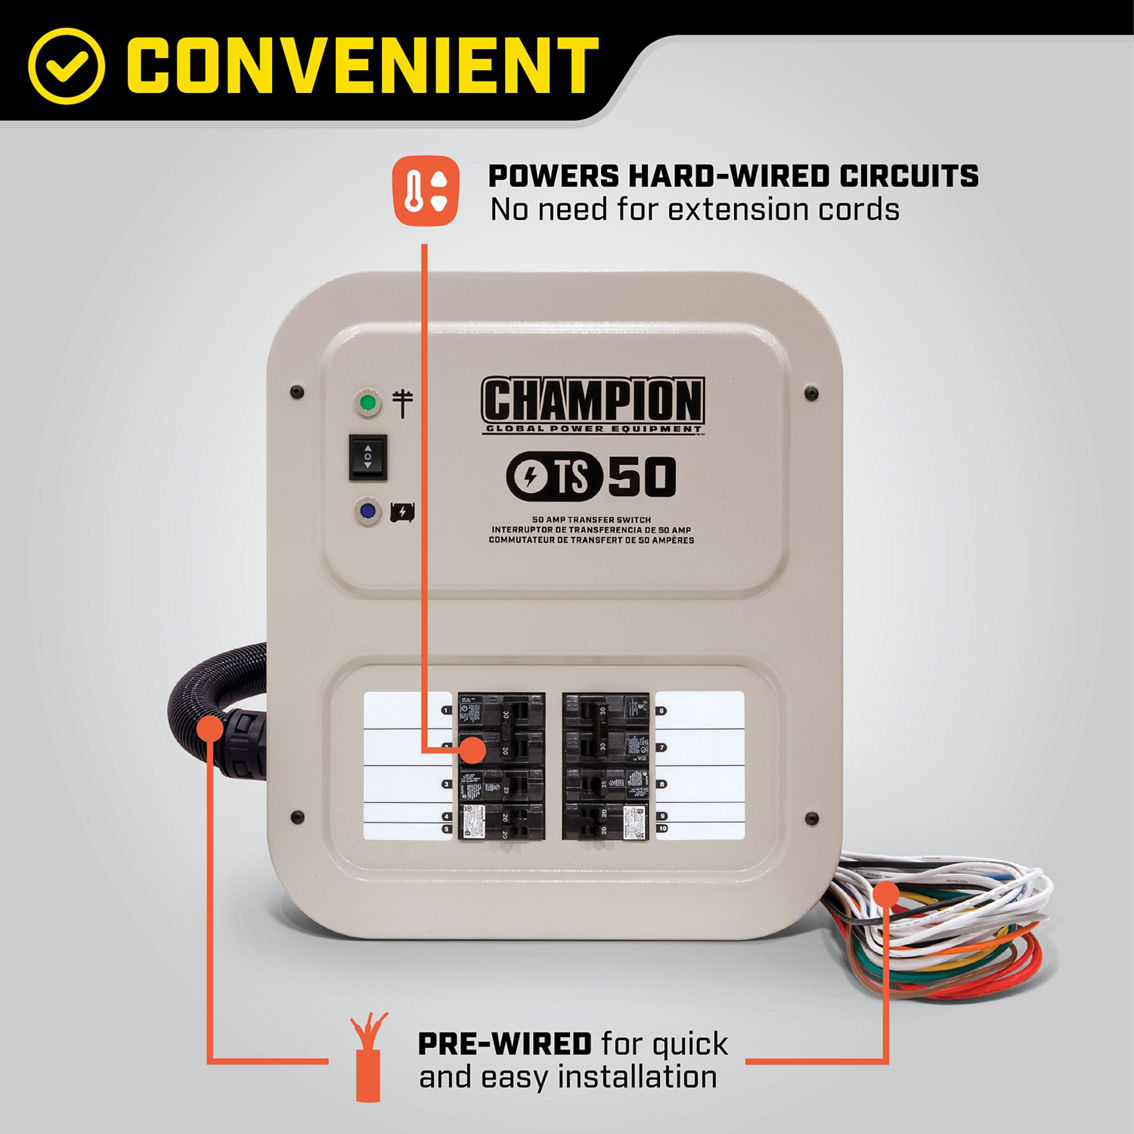 Champion 50 Amp Manual Transfer Switch with 30 ft. Power Cord and Power Inlet Box - Image 6 of 10